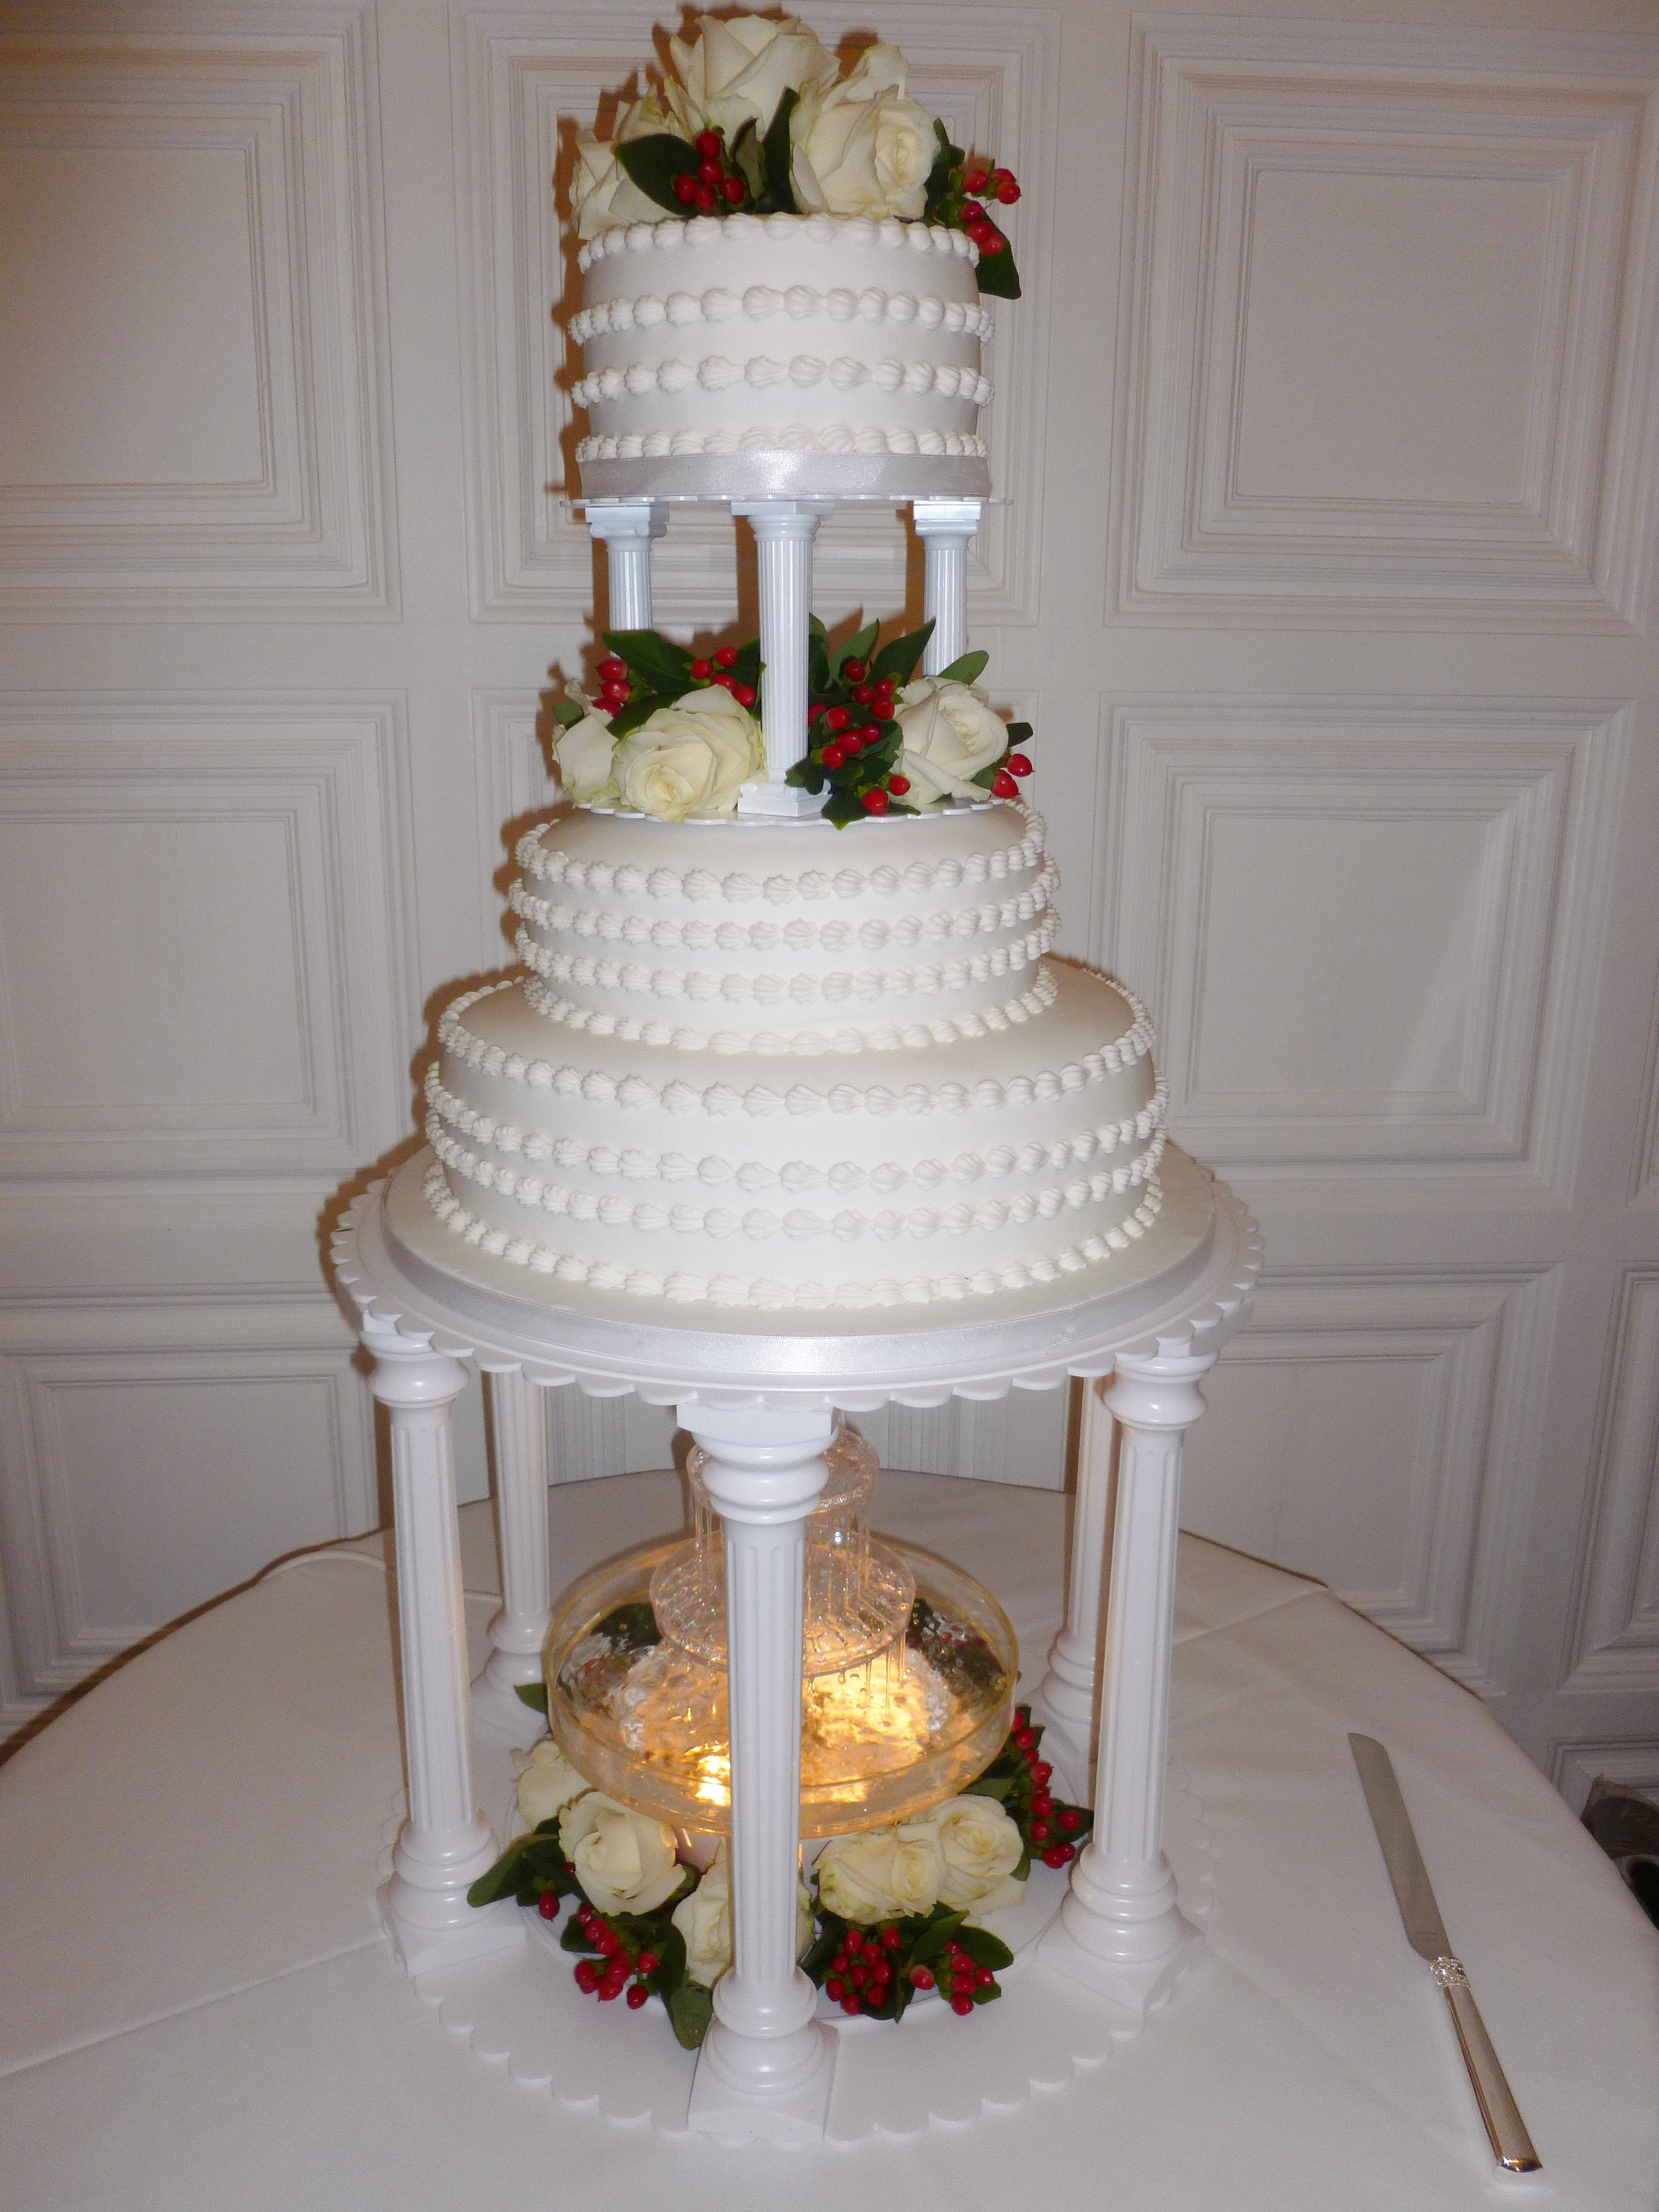 Wedding Cakes With Water Fountains
 Wedding Cake Water Fountain